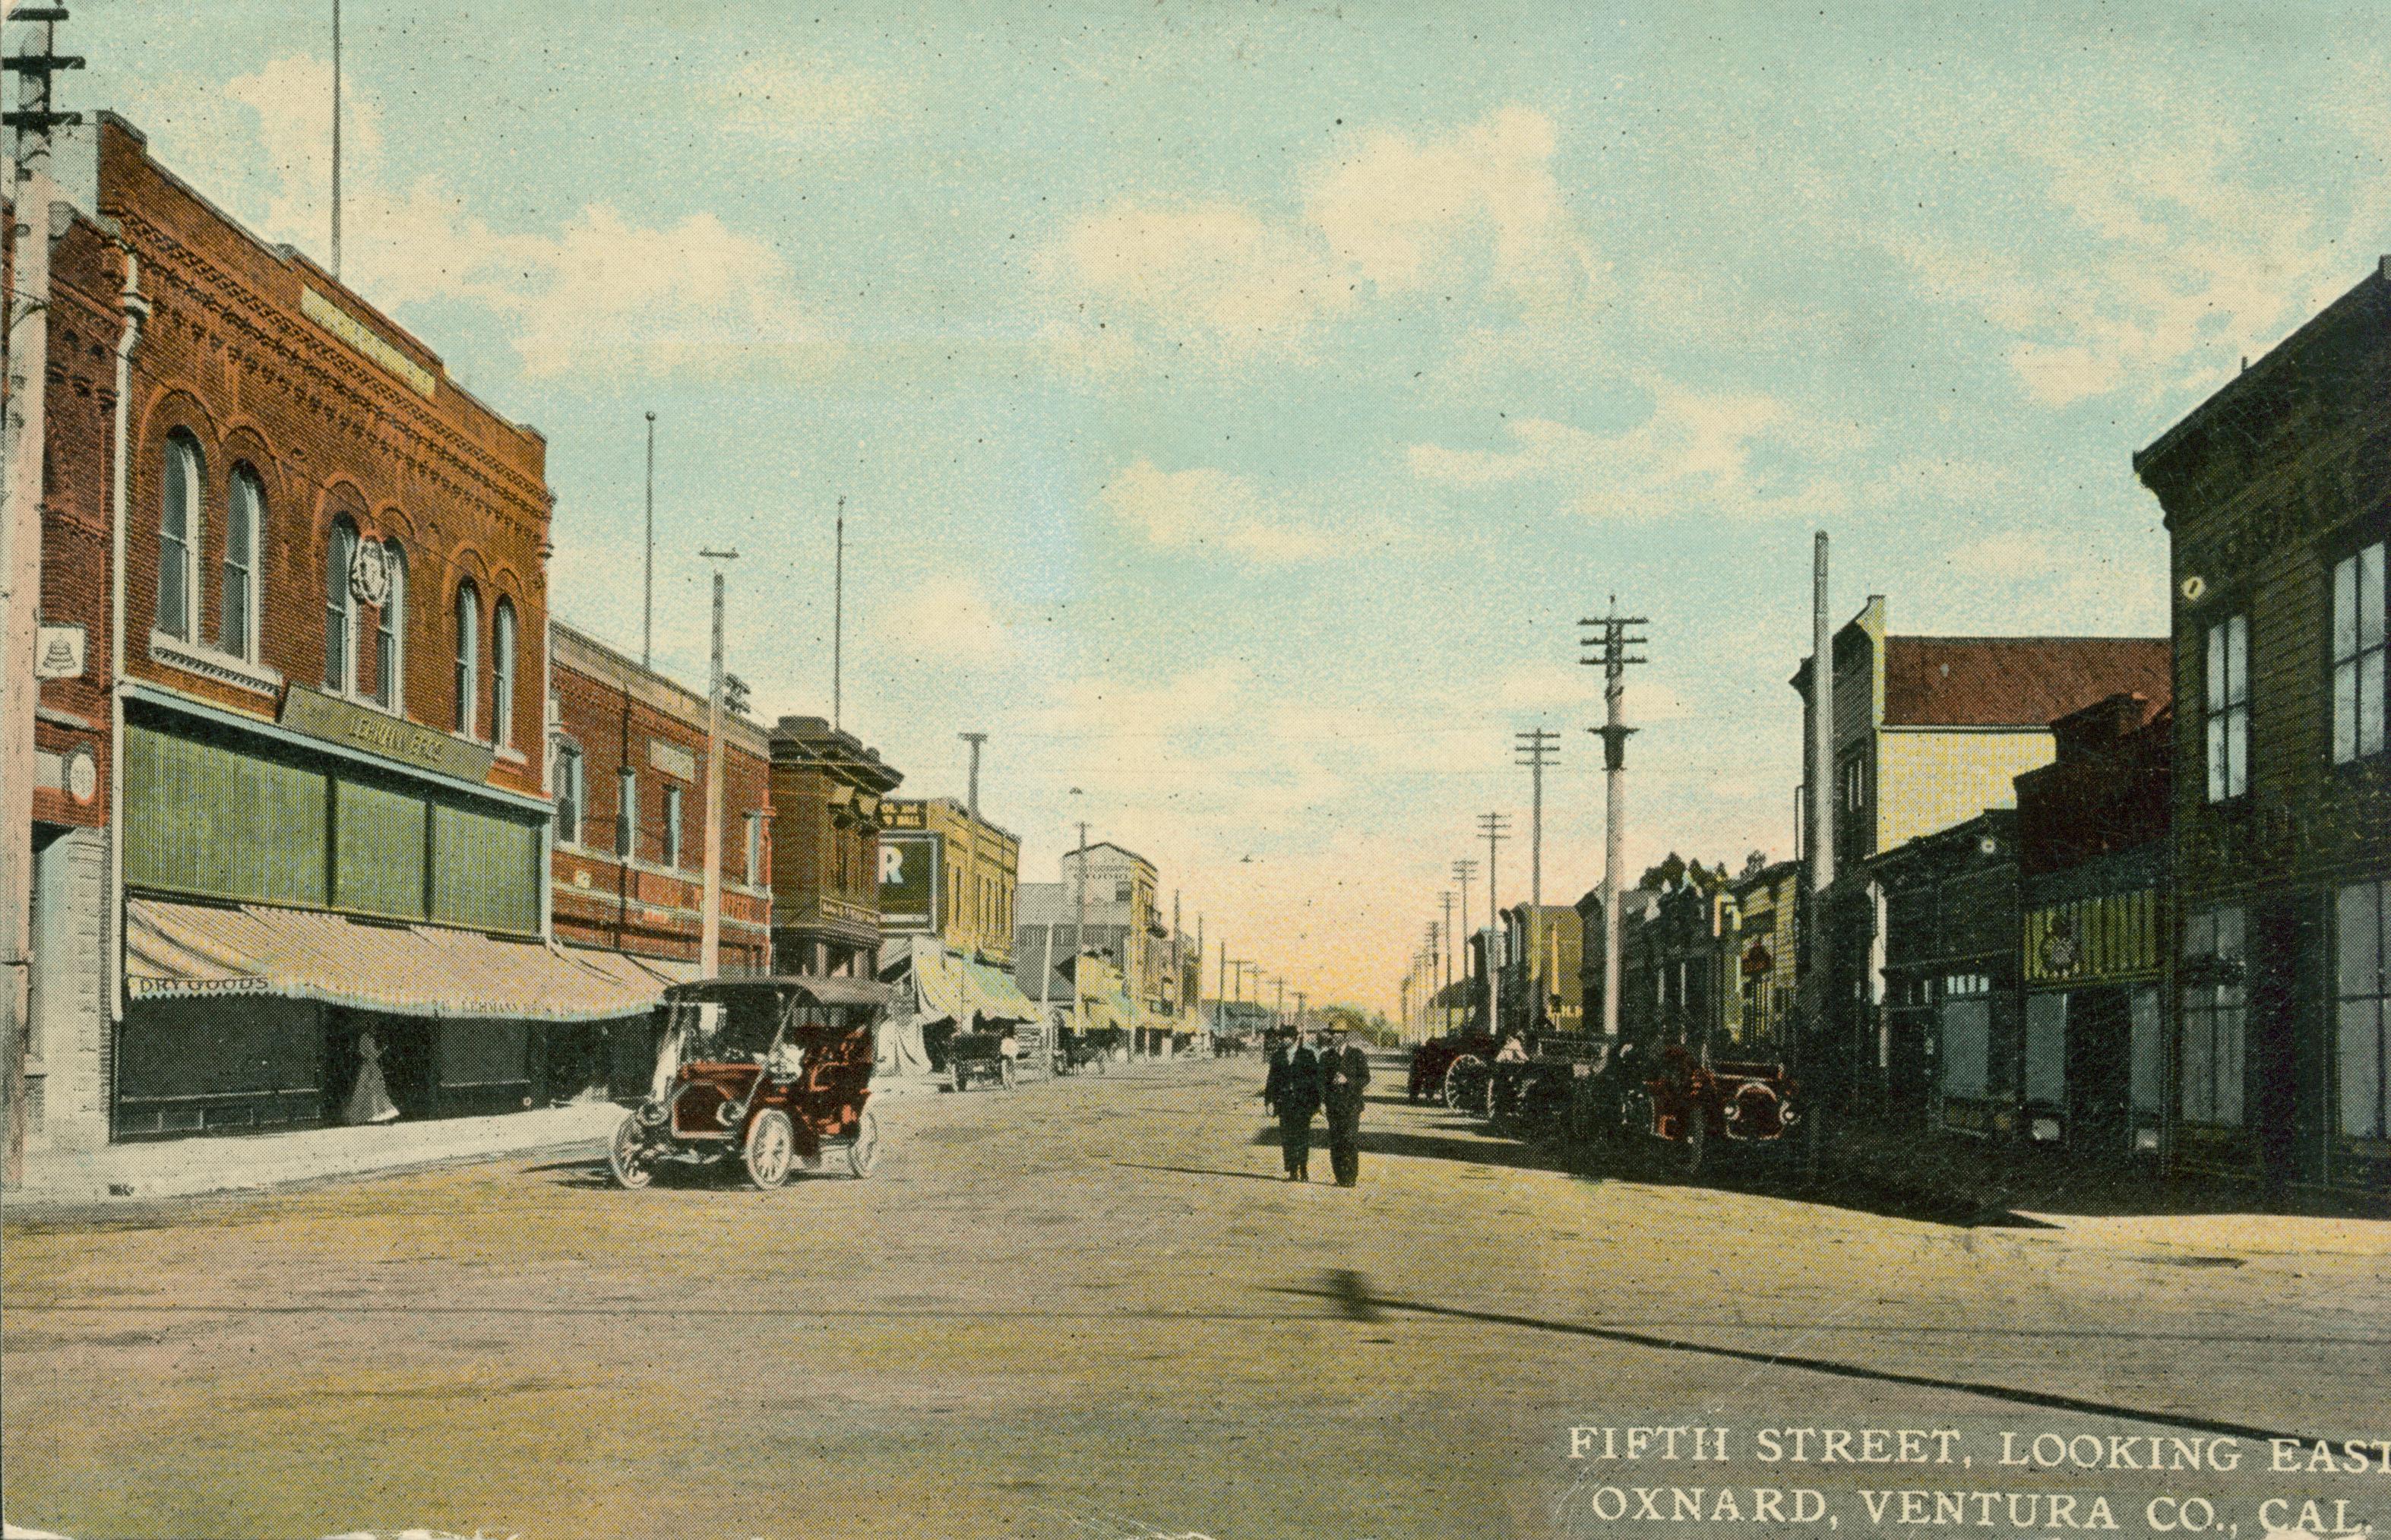 Shows Fifth street in Oxnard lined with buildings and several parked cars